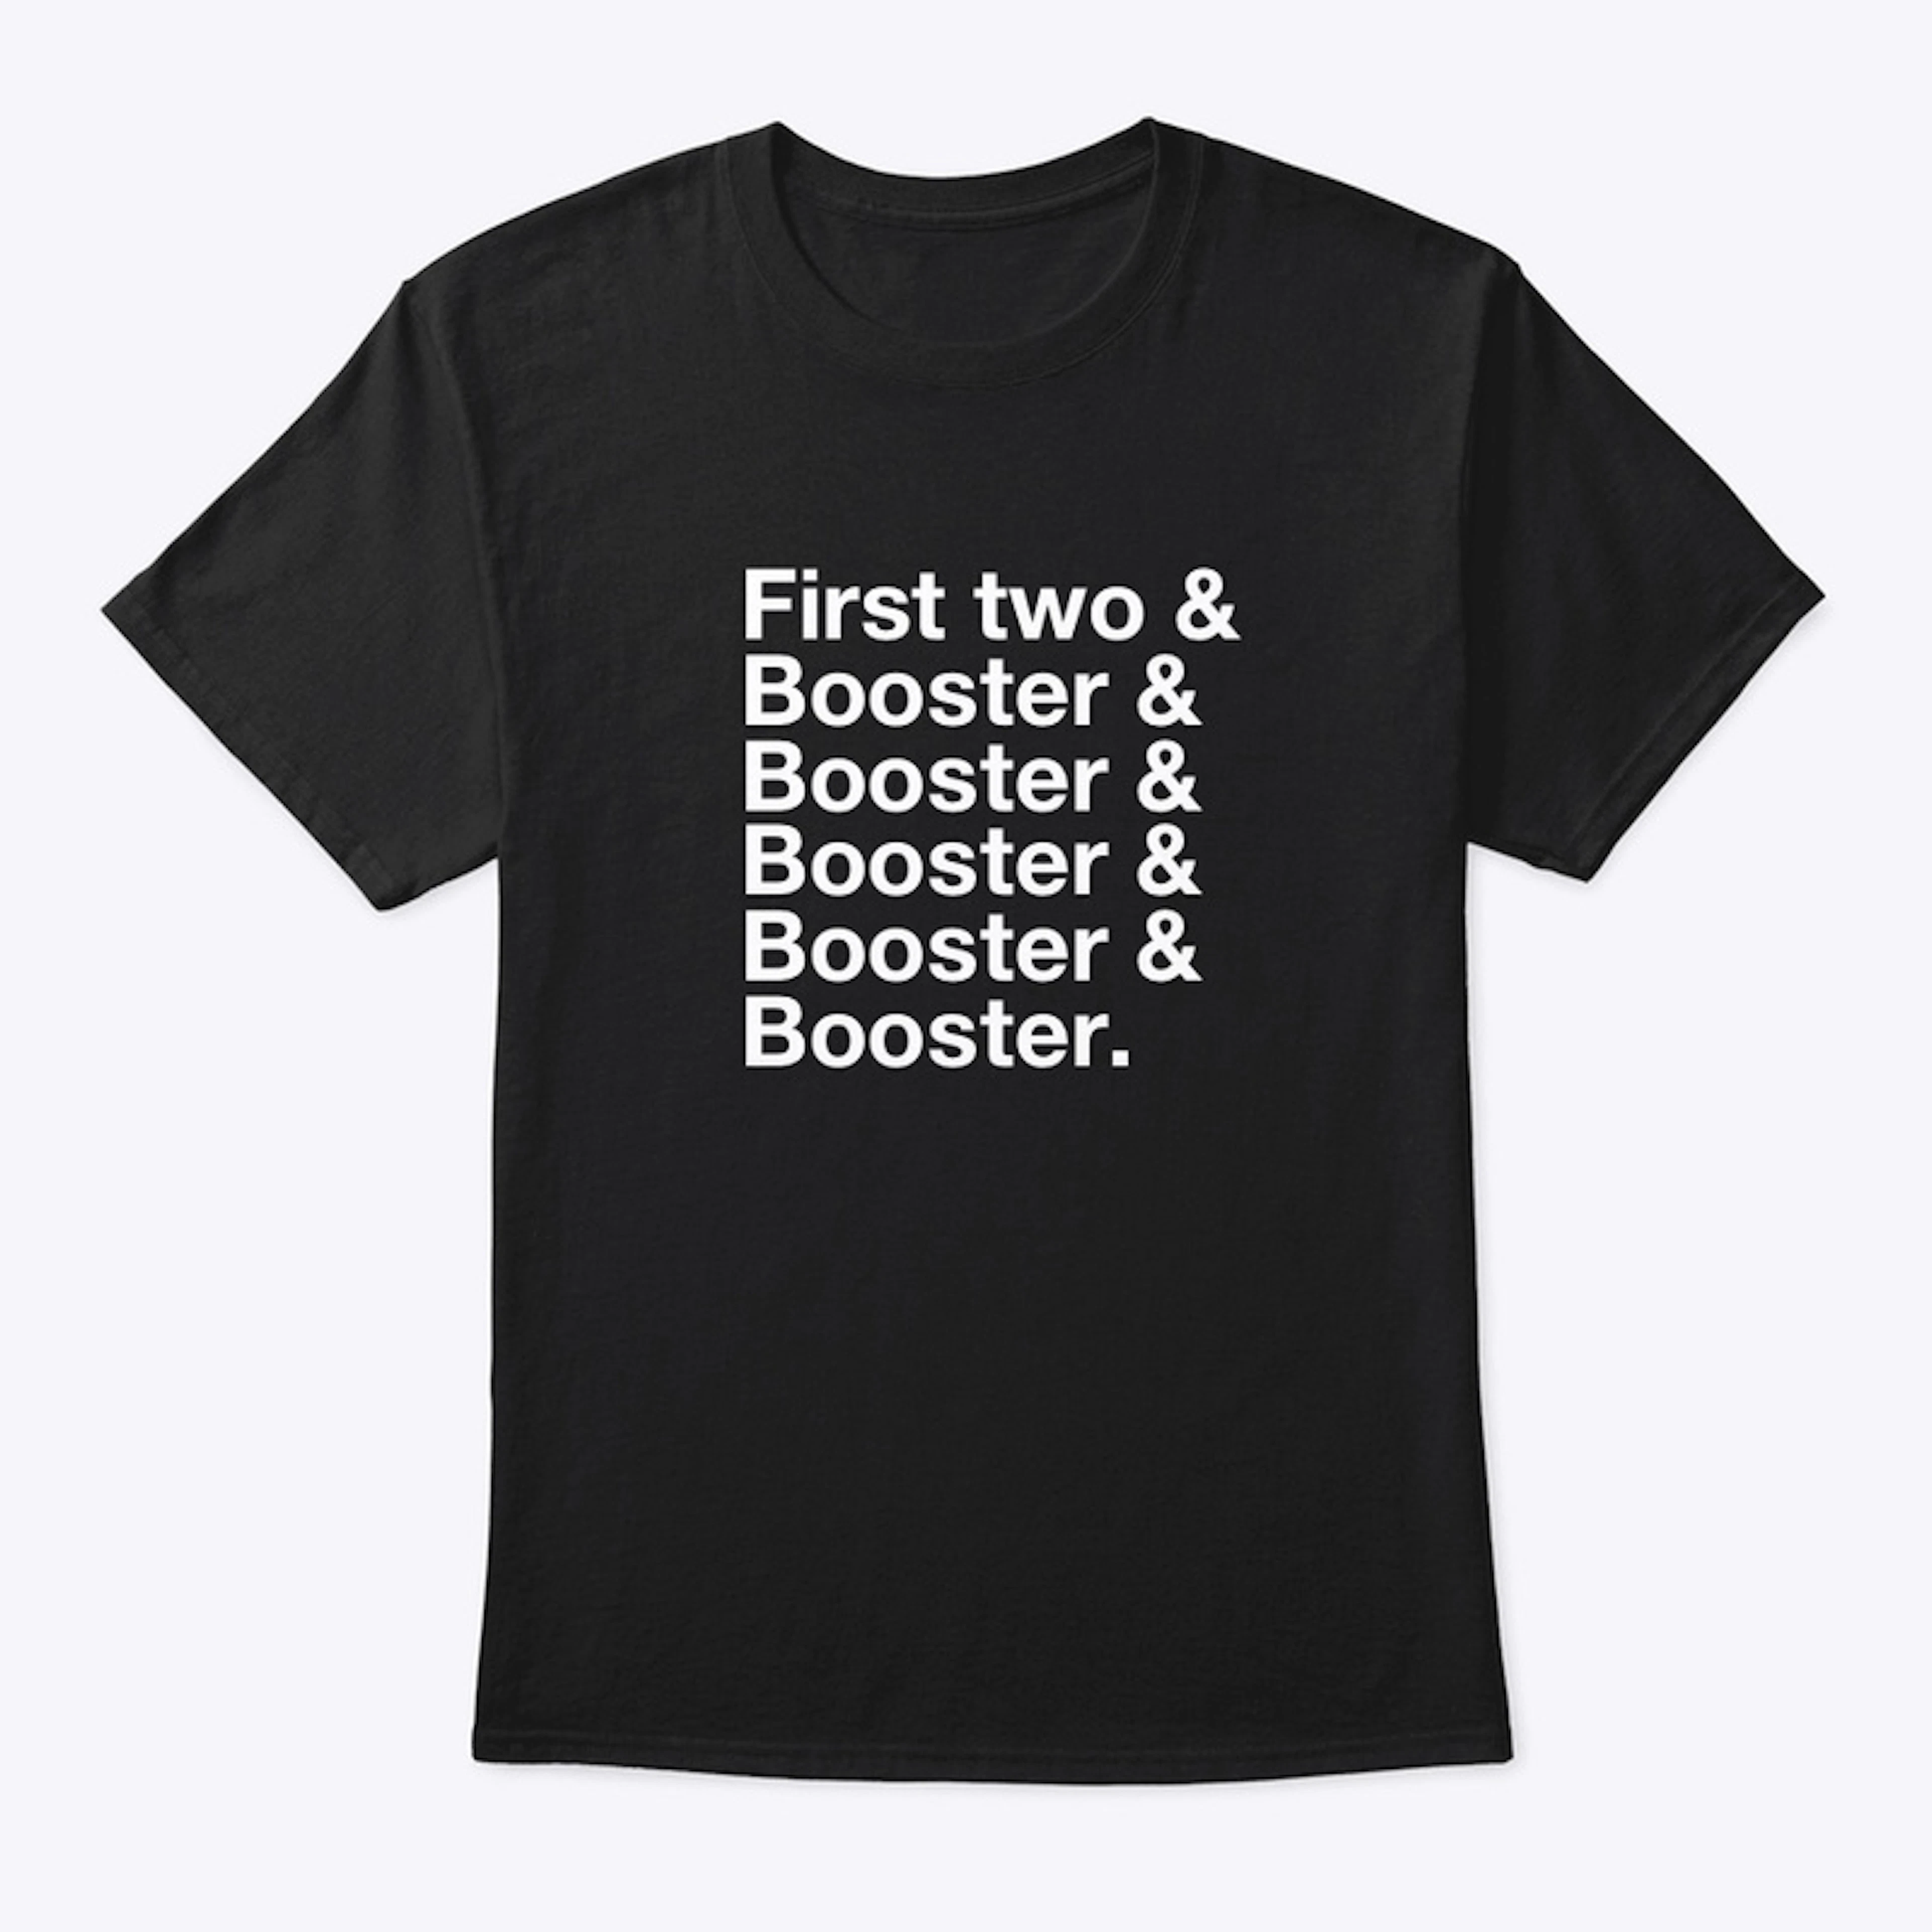 My Fifth Booster Shirt